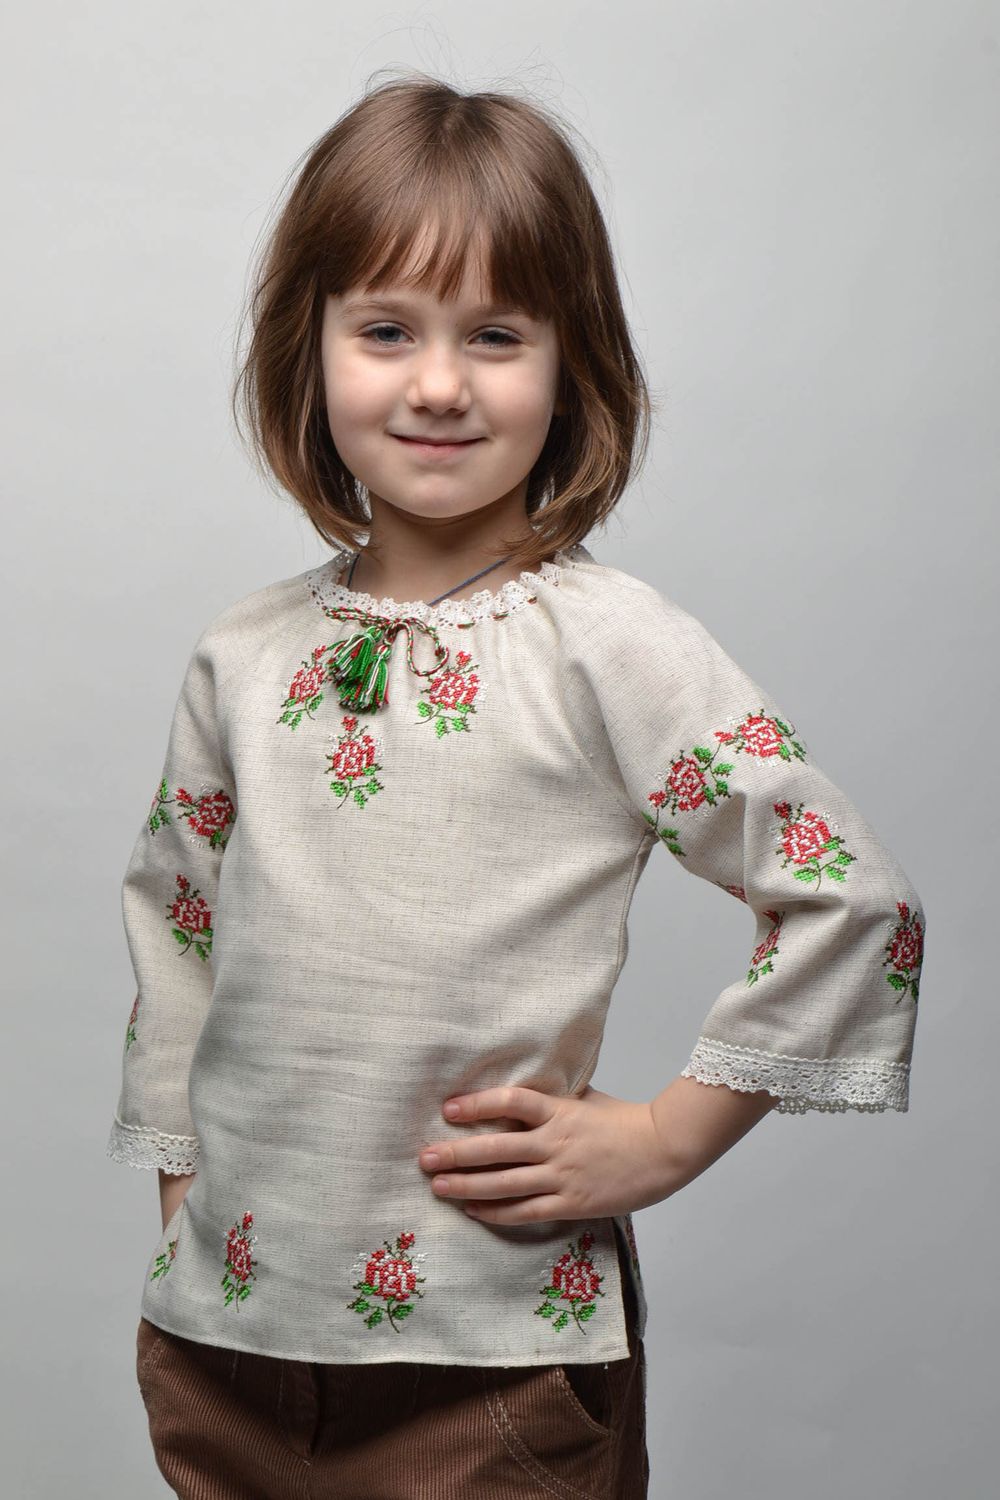 Embroidered shirt for 5-7 years old children photo 1